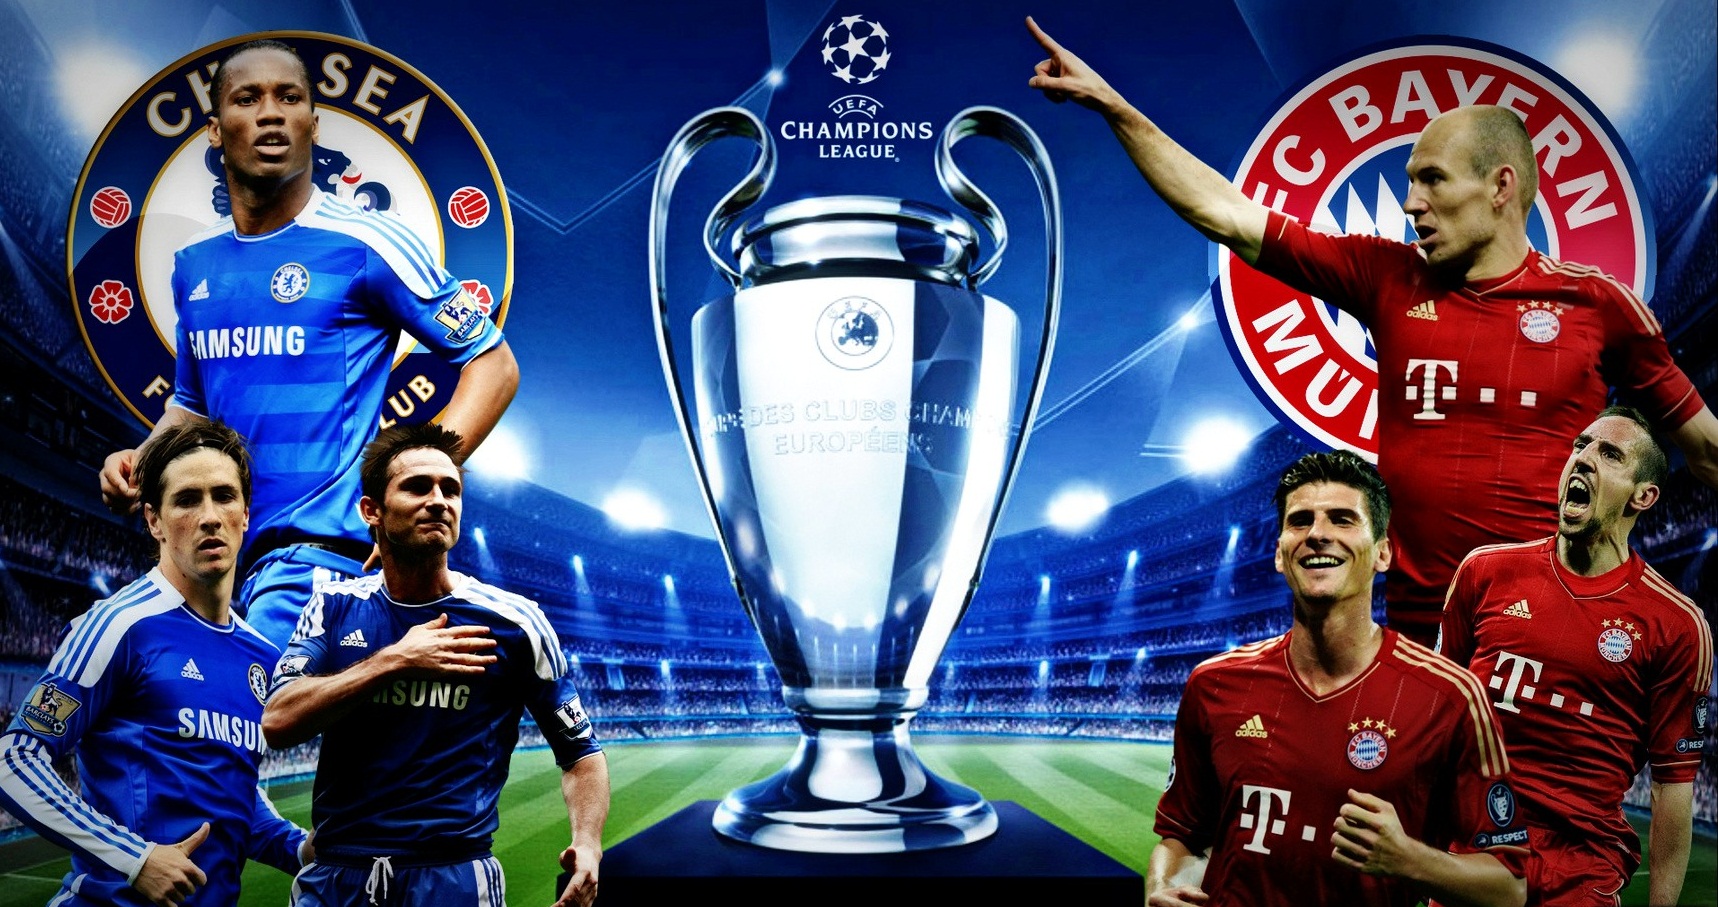 UEFA Champions League Wallpapers